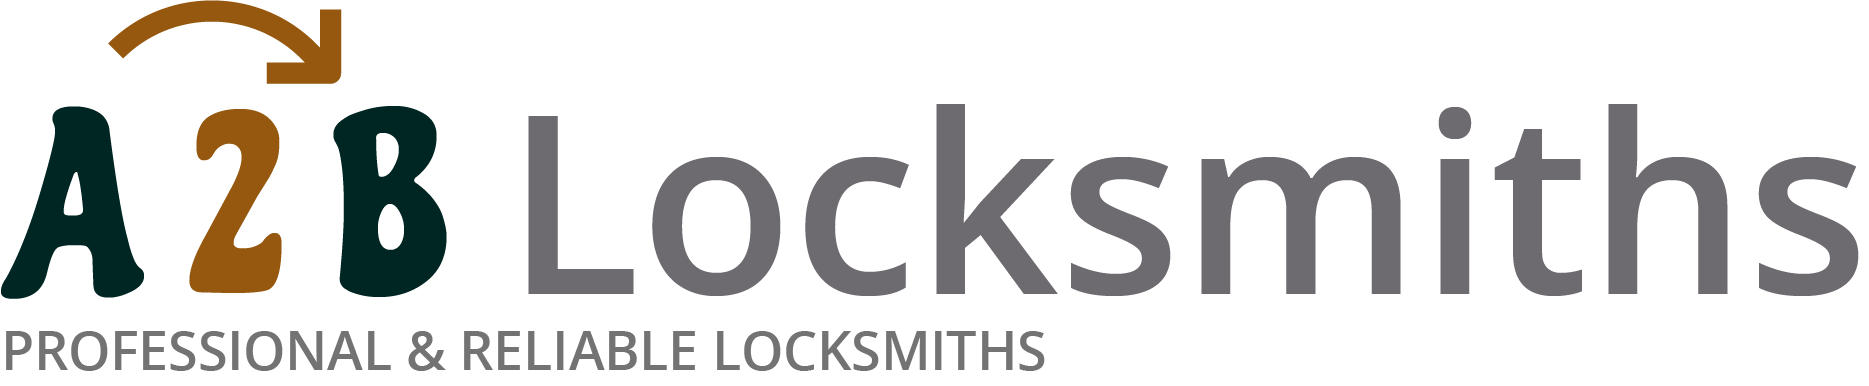 If you are locked out of house in Battersea, our 24/7 local emergency locksmith services can help you.